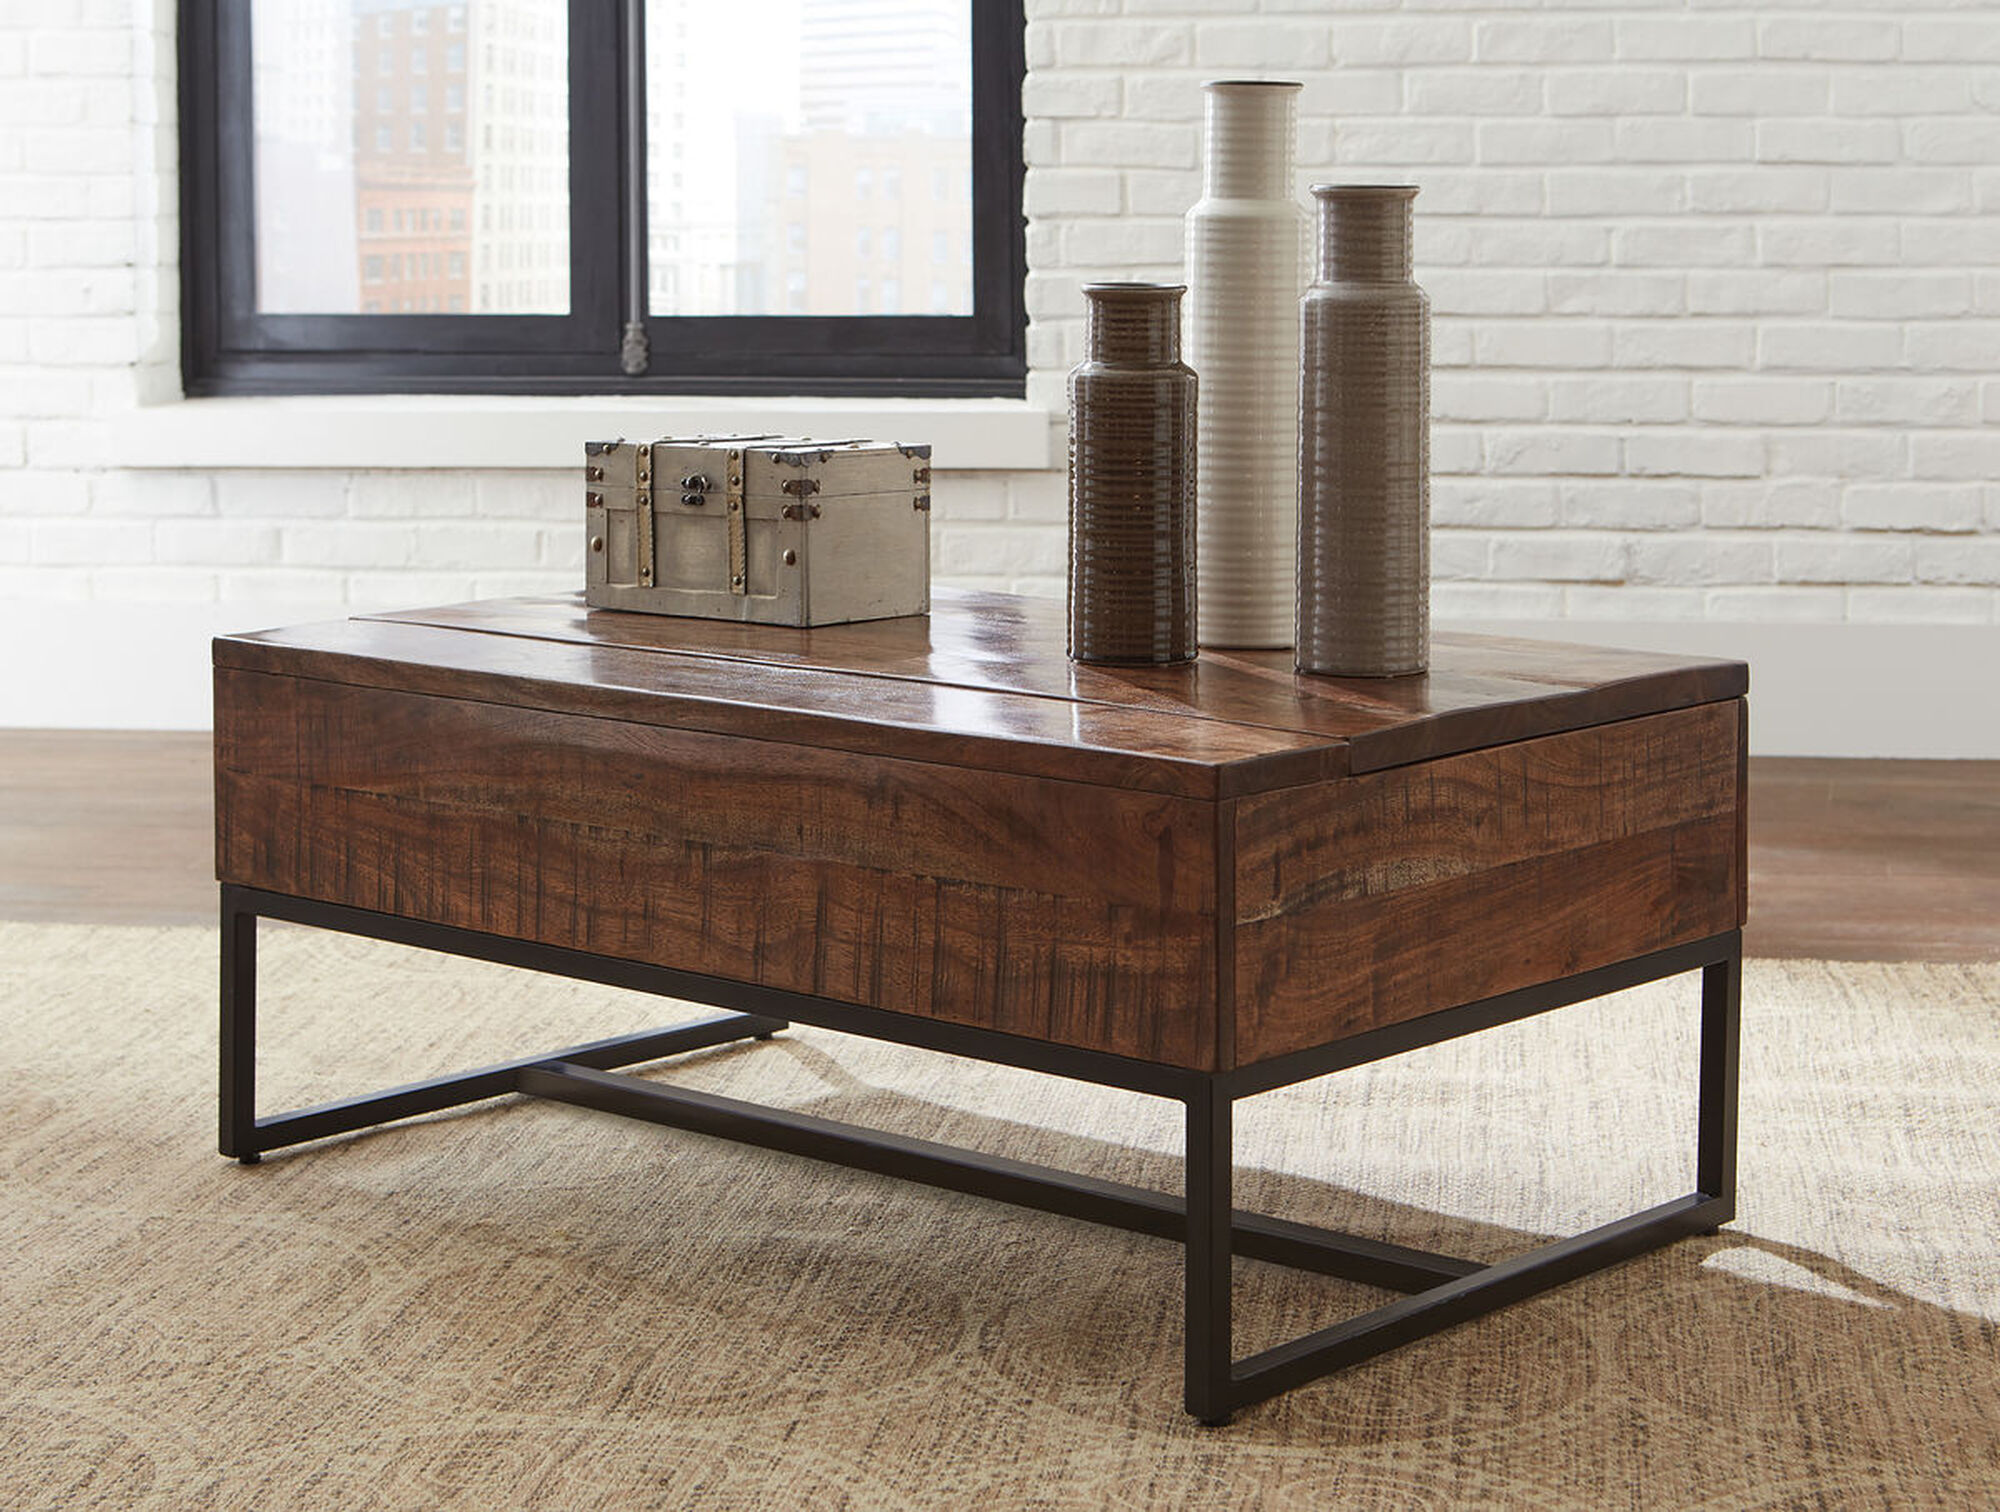 Lift Top Mango Wood Cocktail Table In, Montrose Coffee Table With Lift Top